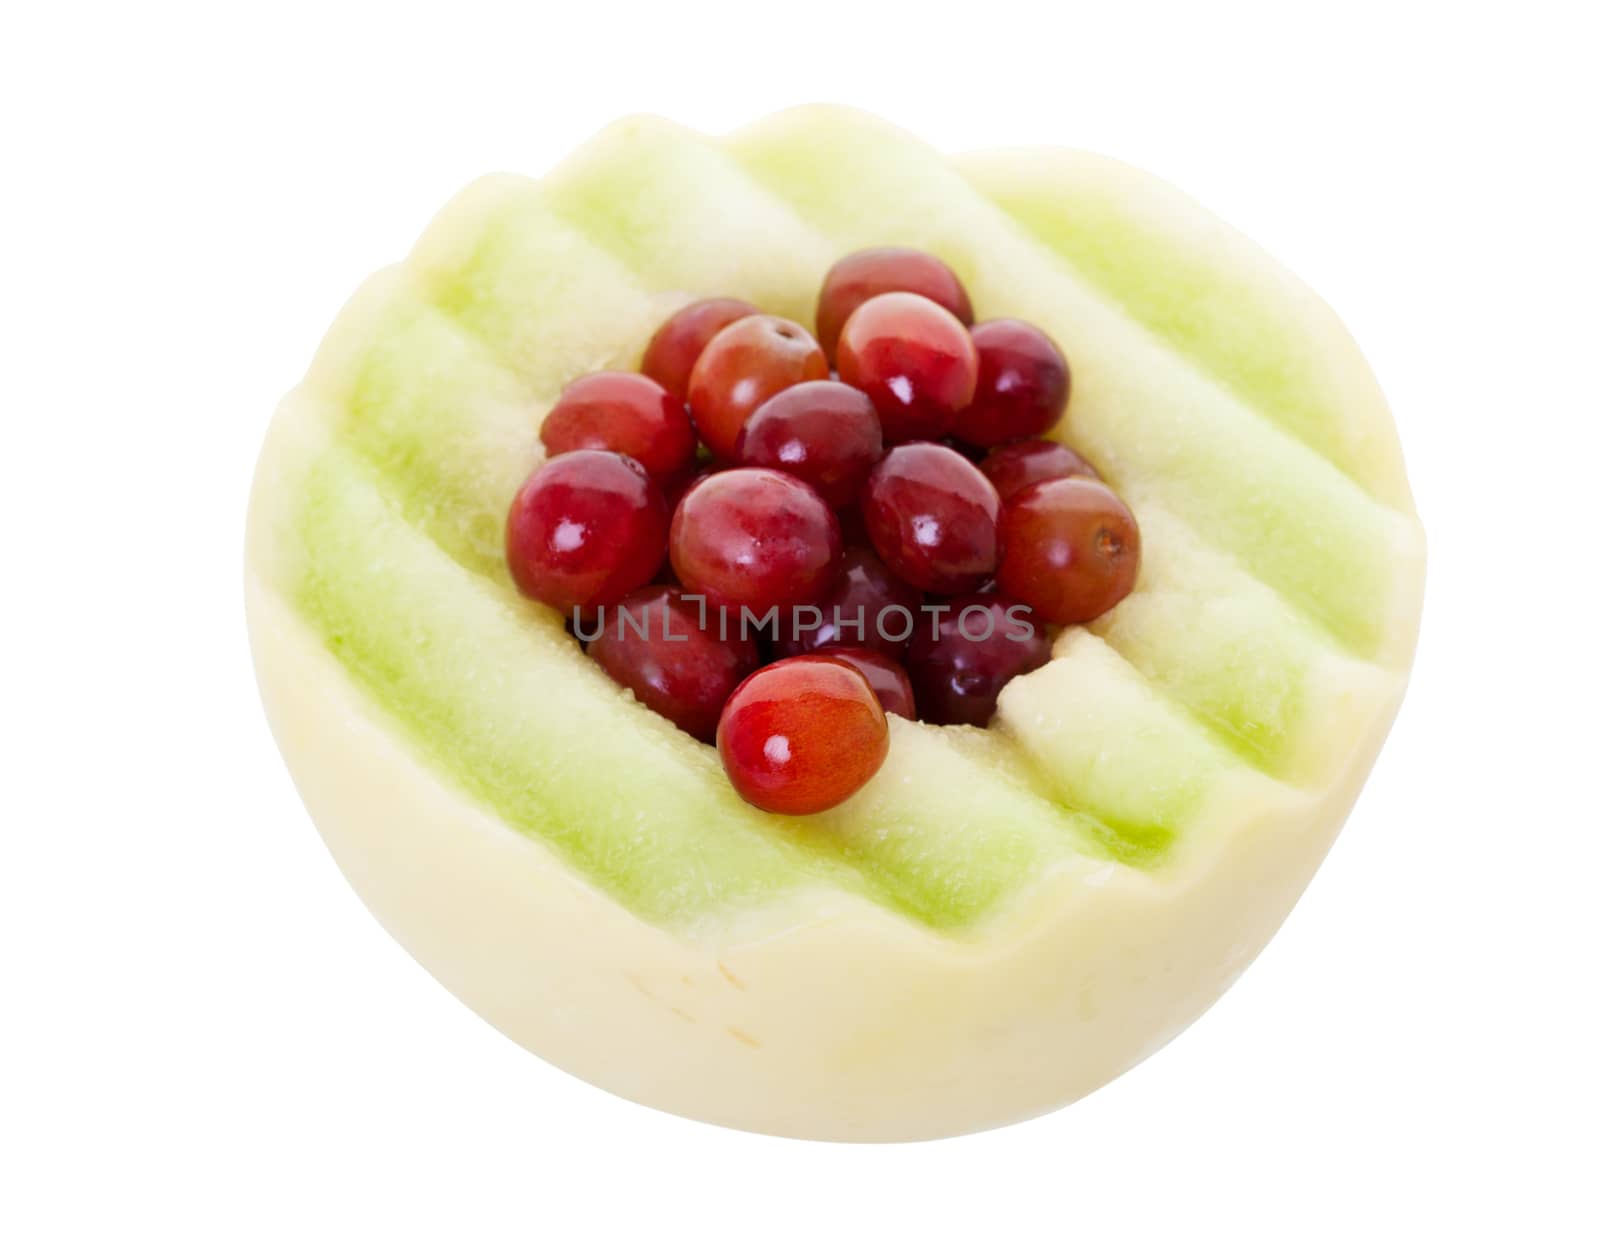 Honeydew Melon and Grapes with Clipping Path by songbird839